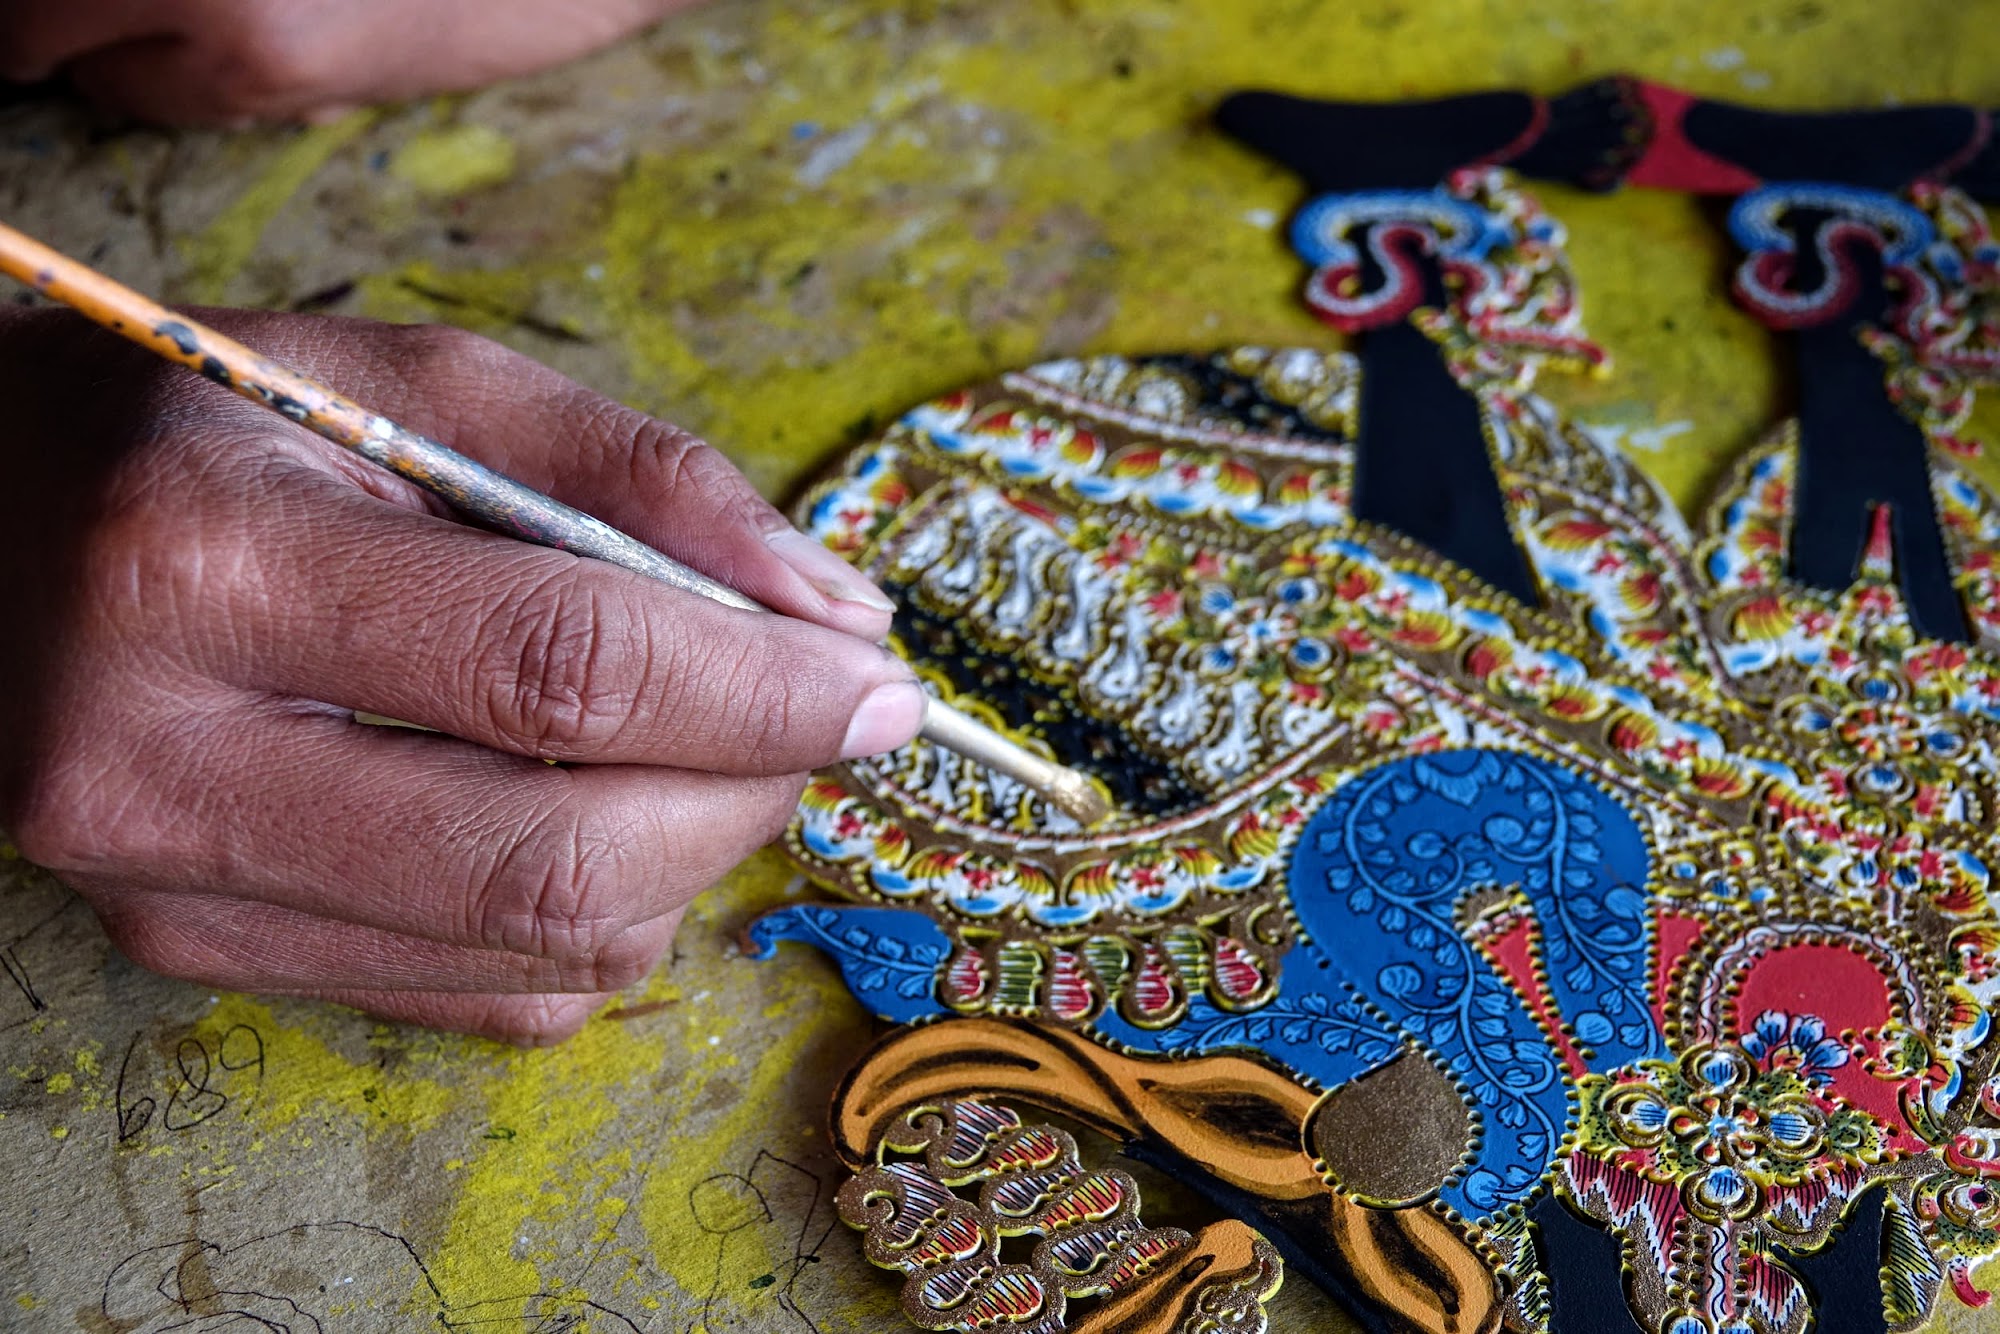 The Crafts Of Indonesia A Window Into Vibrant Traditions Ze Wandering Frogs